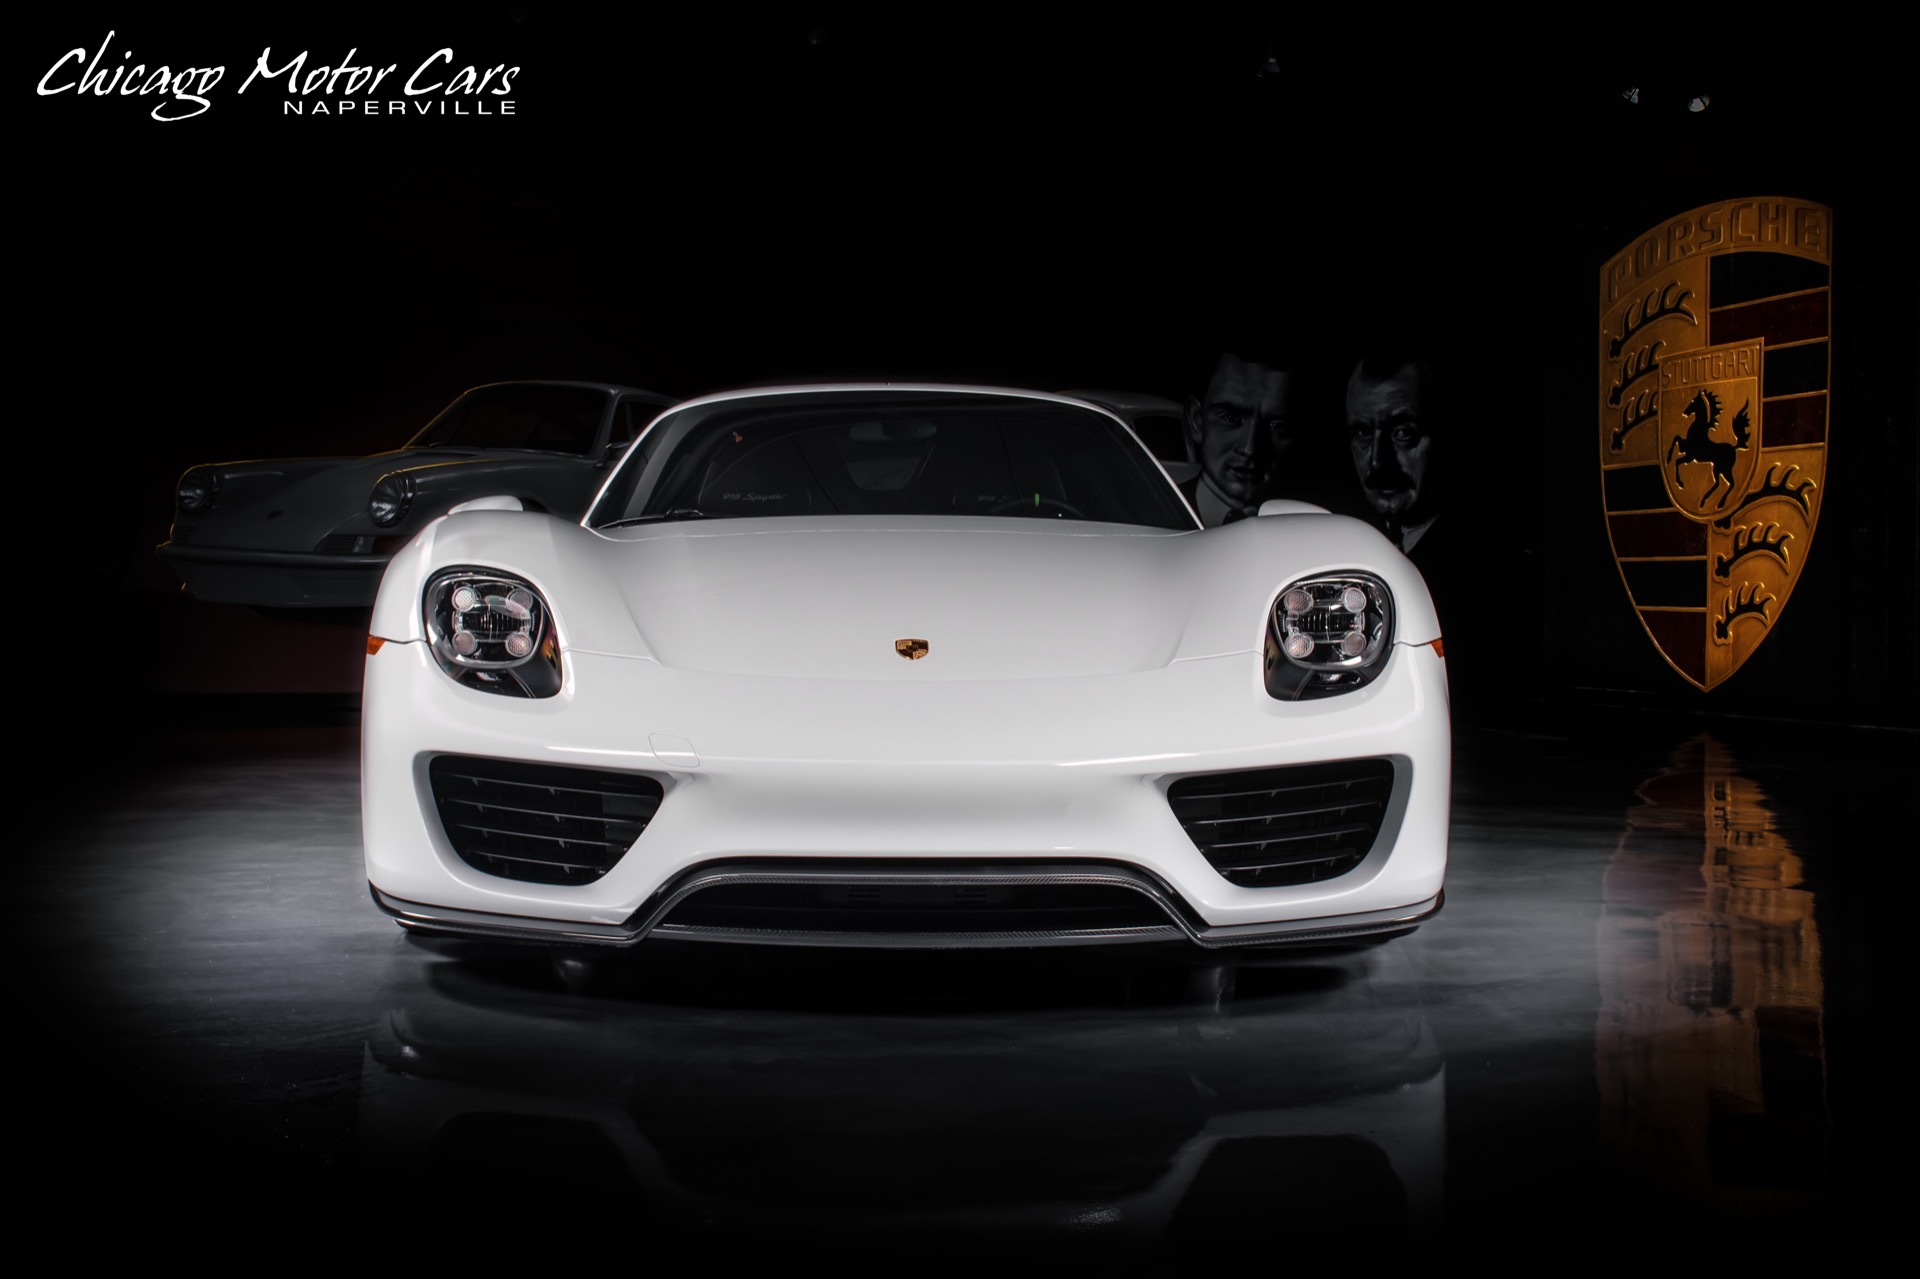 Used-2015-Porsche-918-Spyder-Only-1034-Miles-Serviced-RARE-Collector-Quality-White